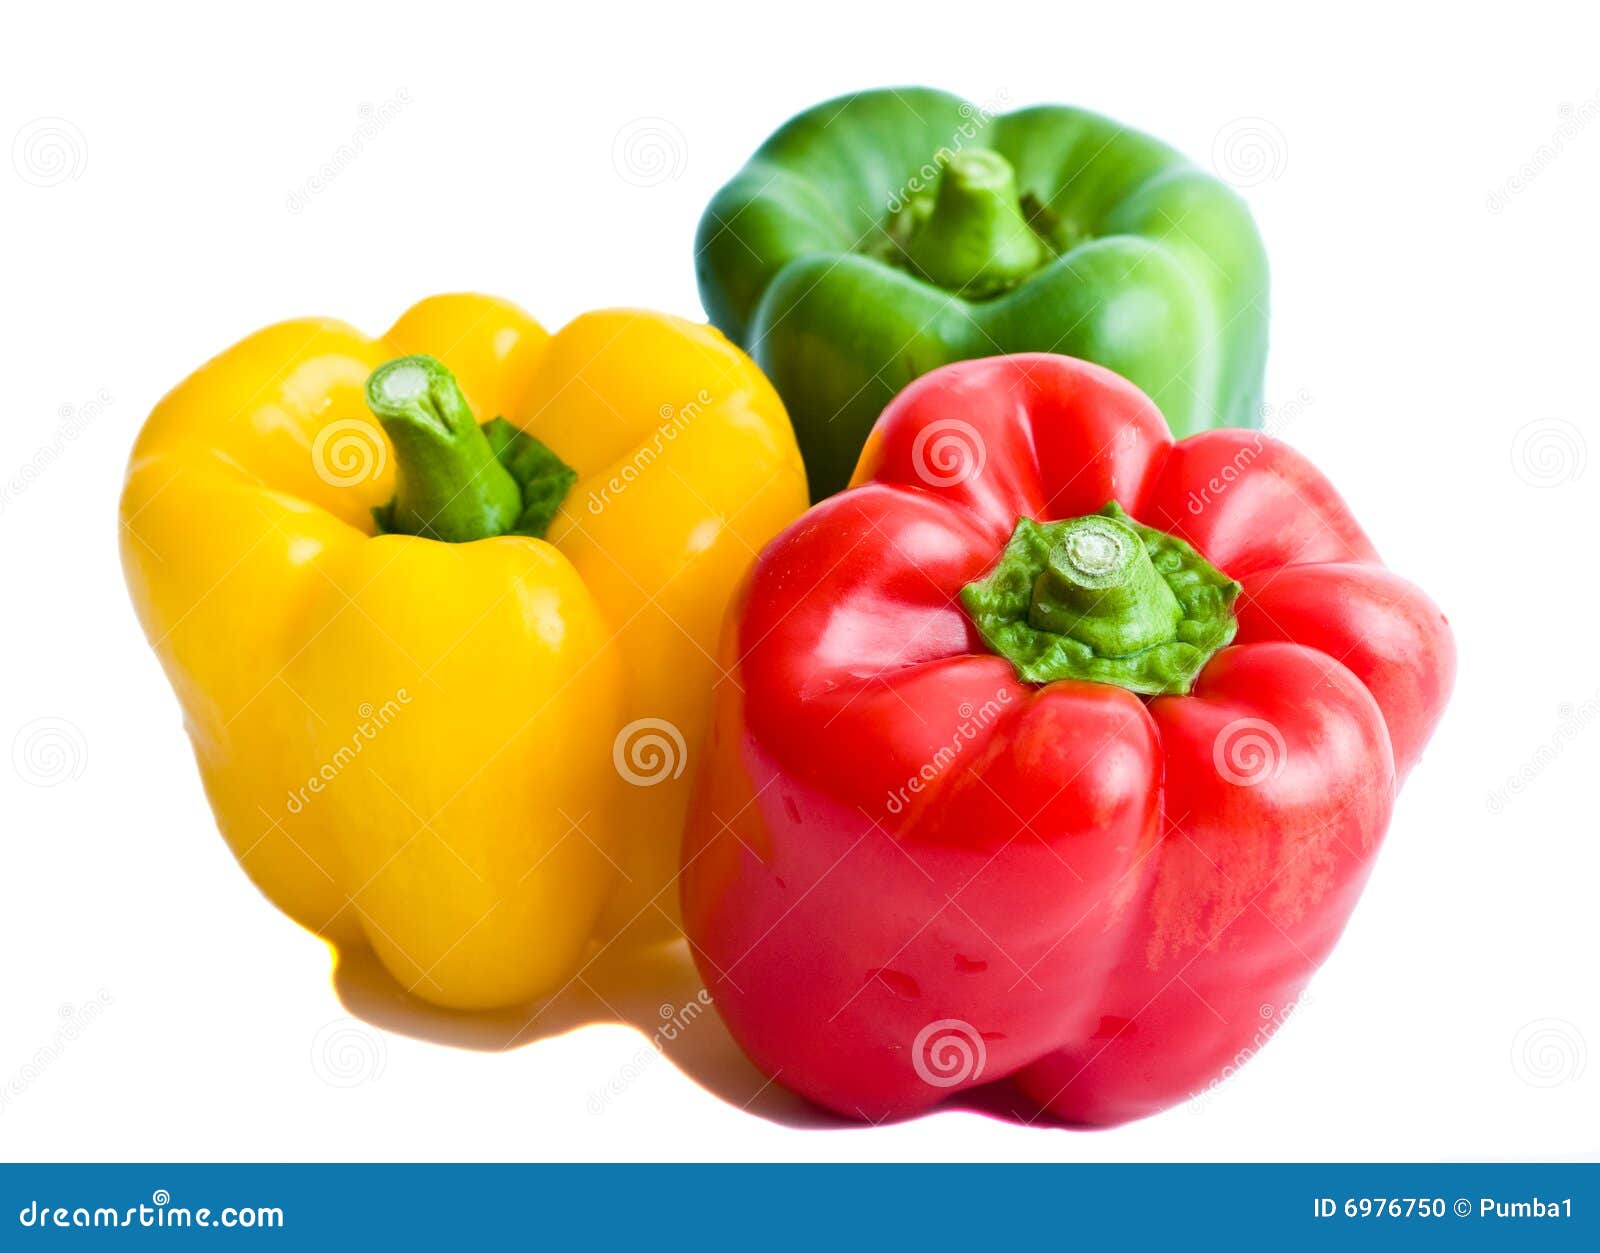 red, yellow, green sweet paprica pepper